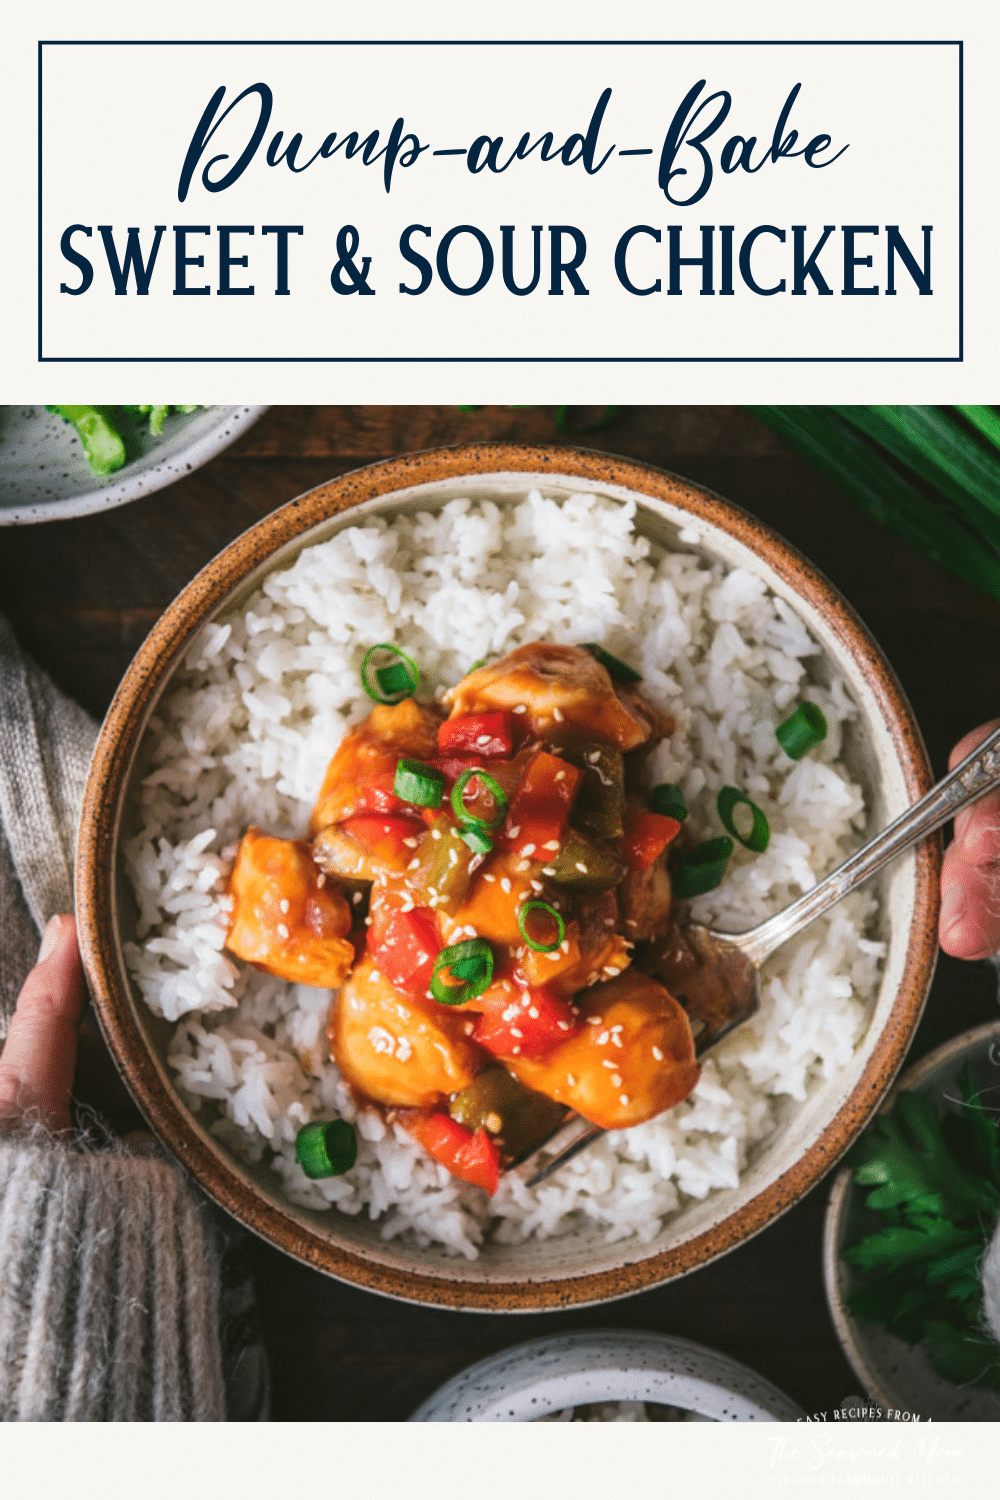 Dump-and-Bake Sweet and Sour Chicken - The Seasoned Mom